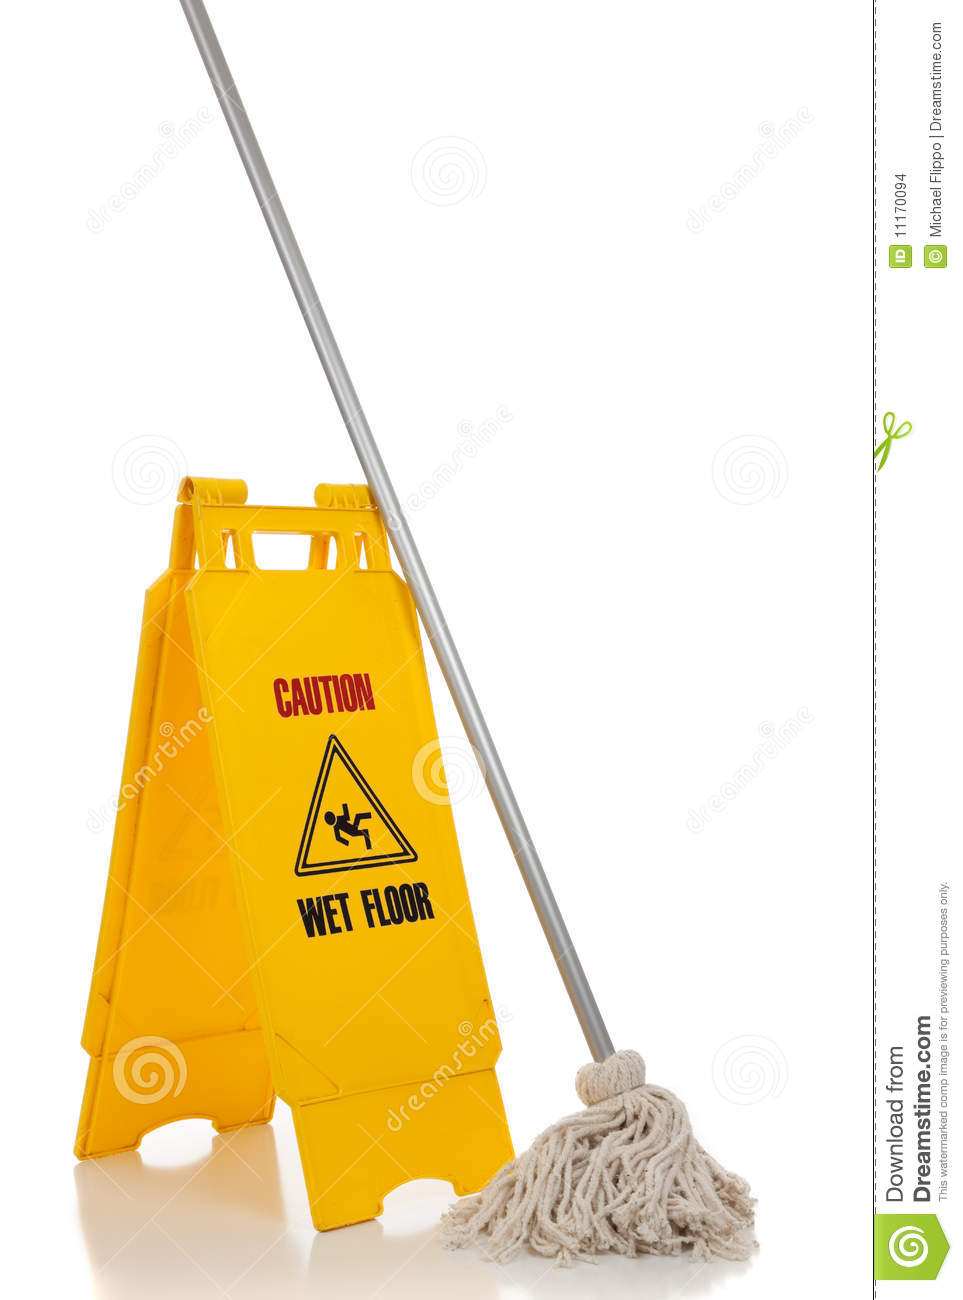 Wet Floor Sign And Mop On White Background Stock Images   Image    